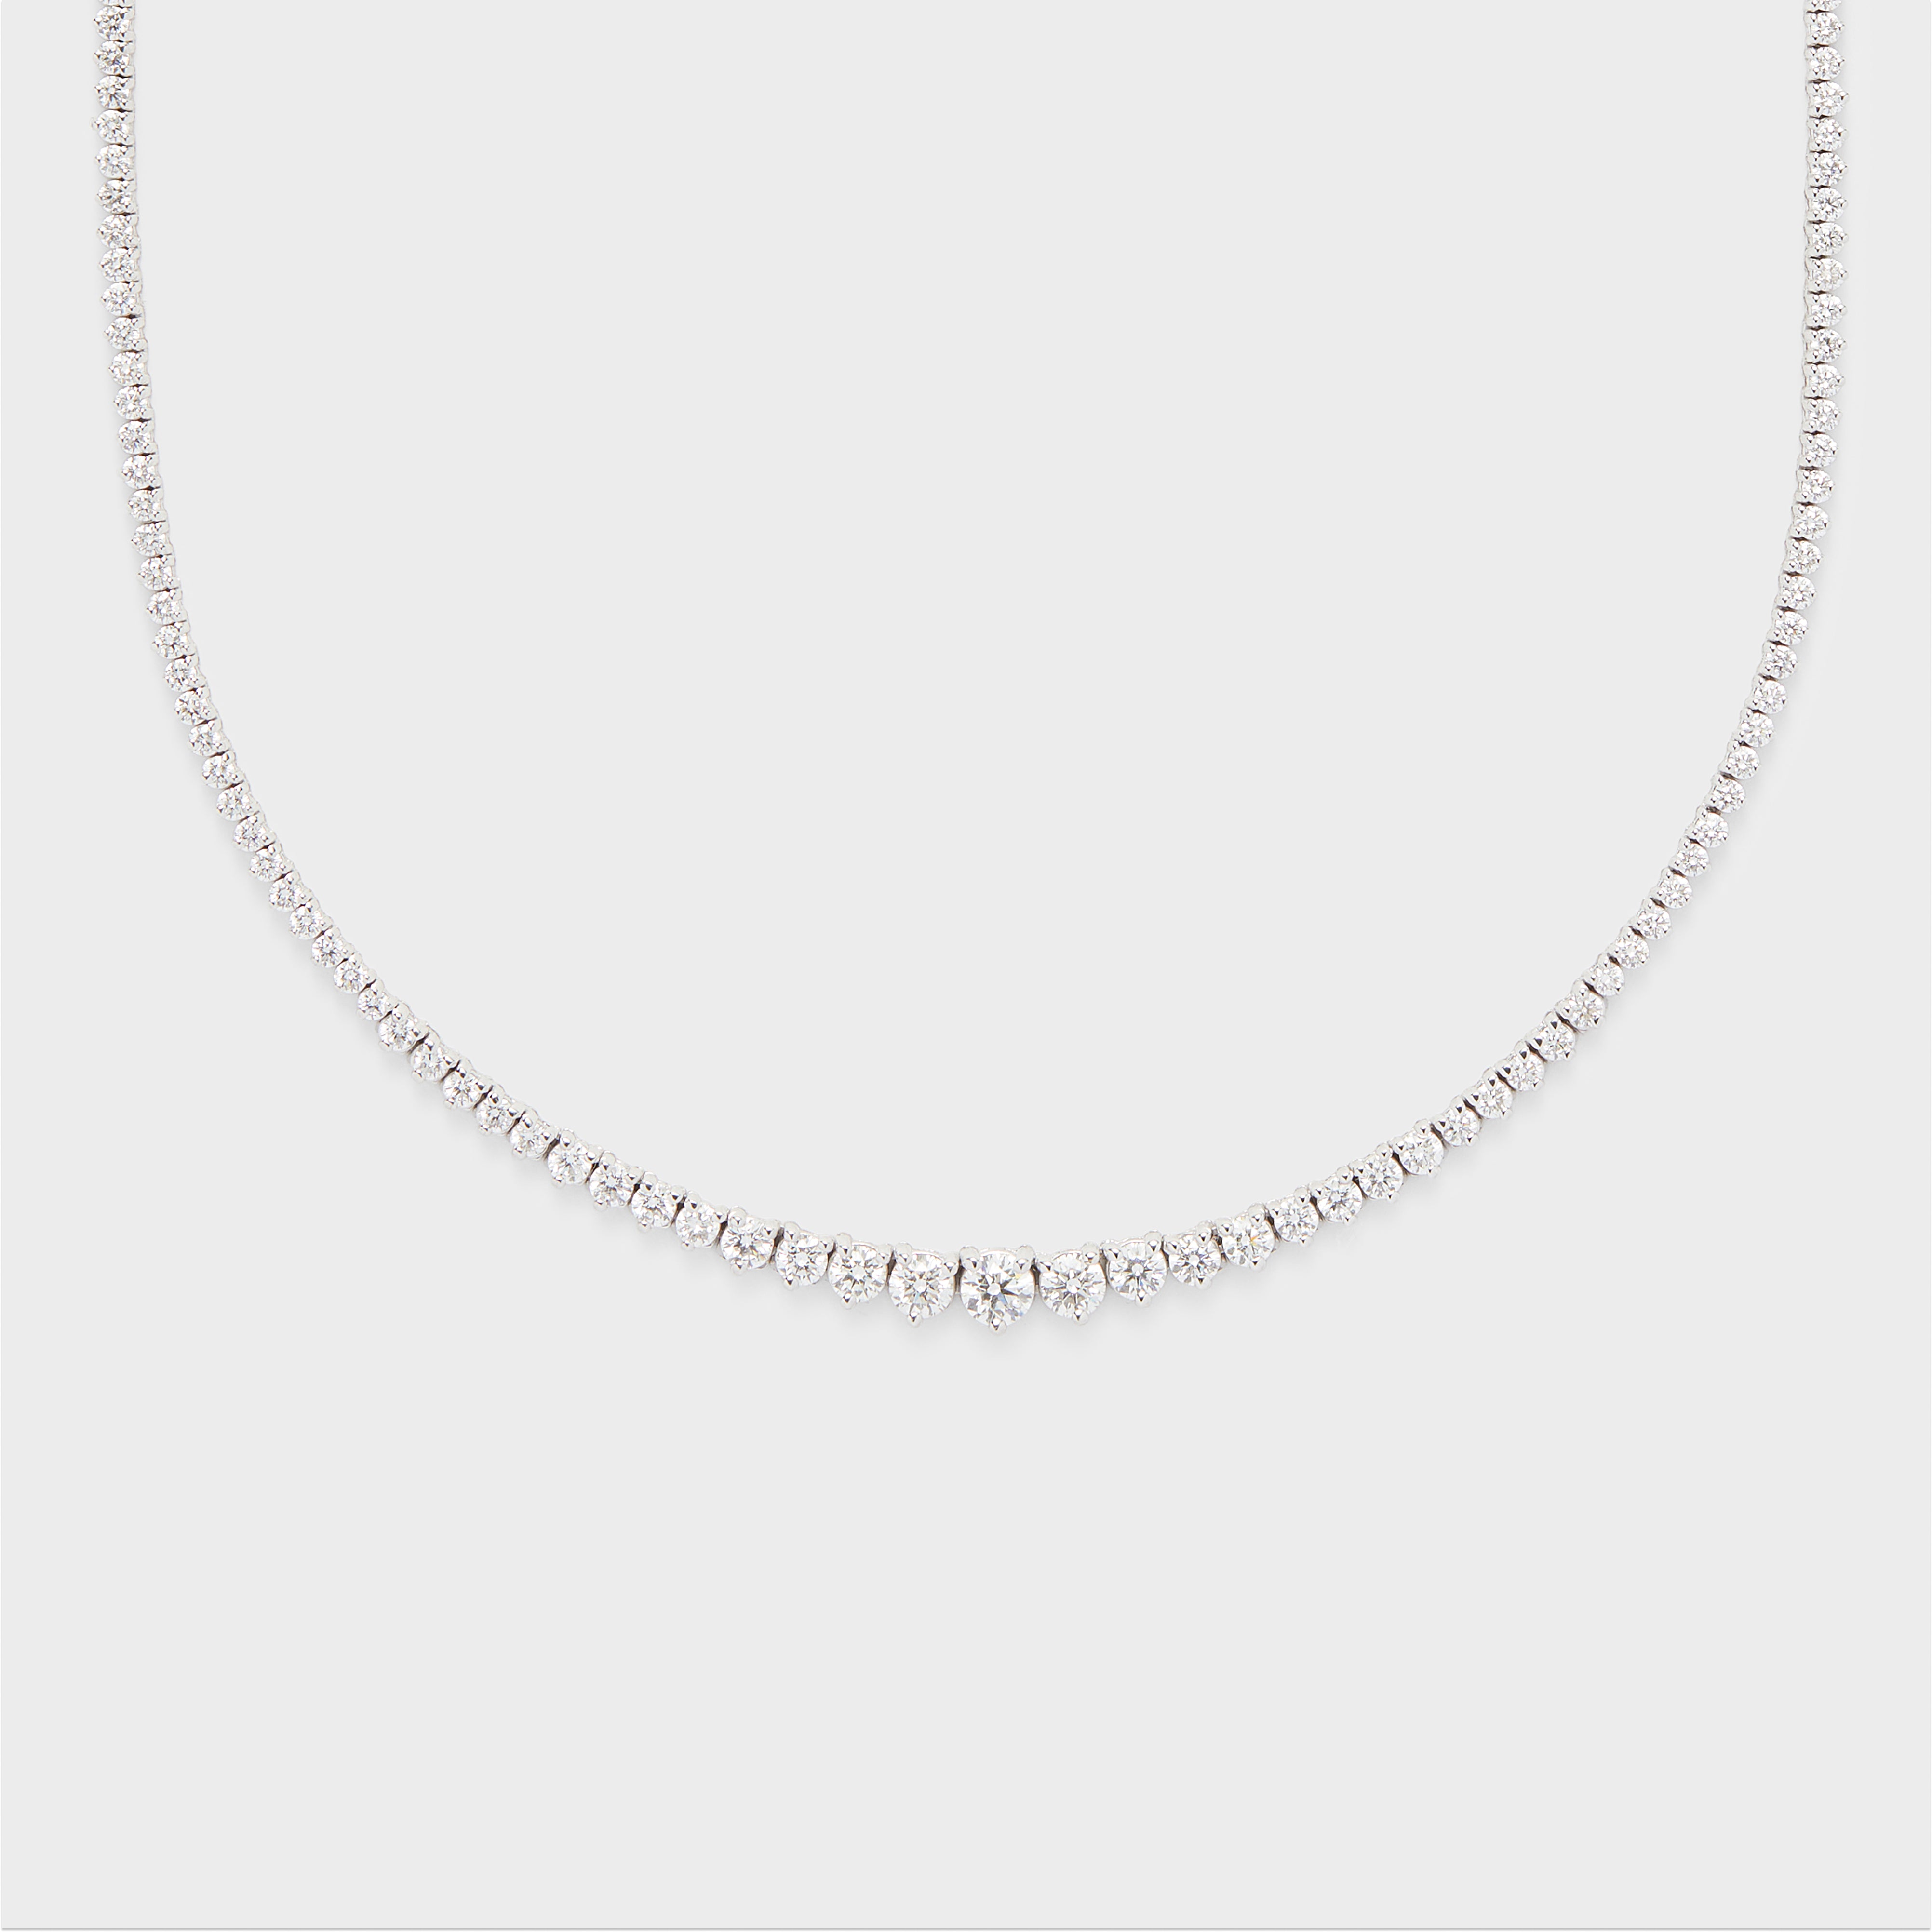 Diamond Riviera Necklace The Clear Cut